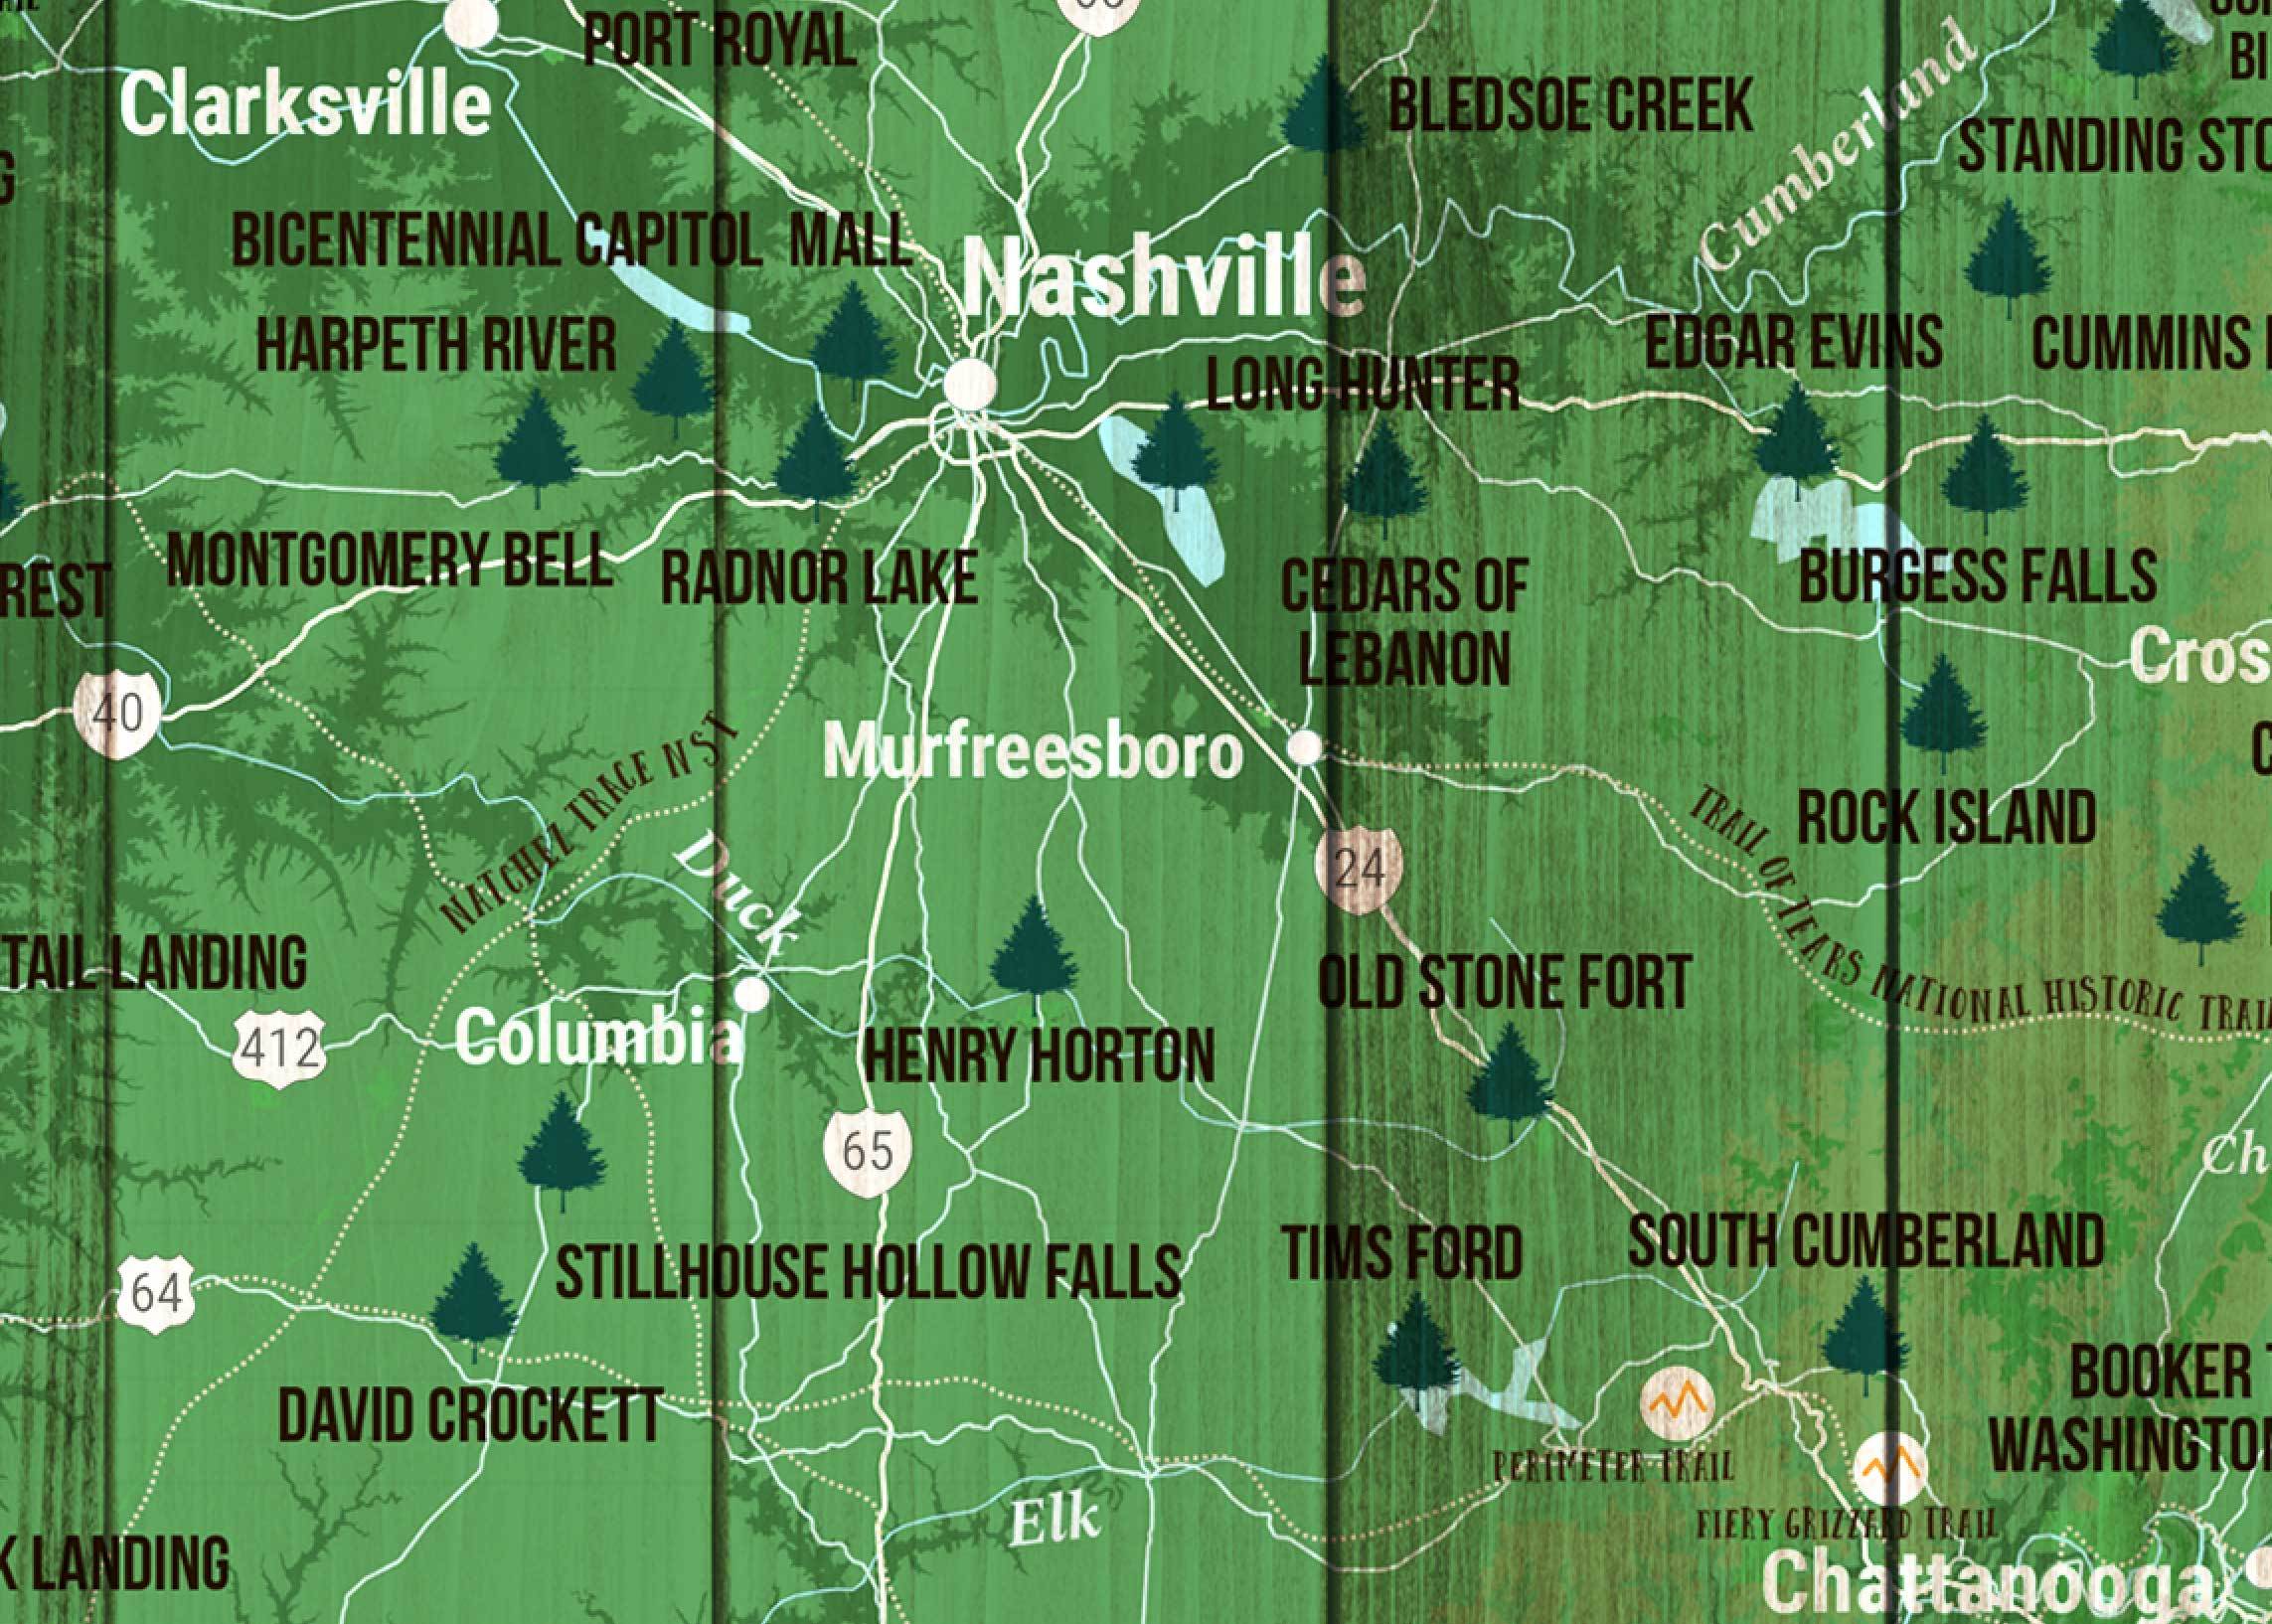 state parks in tennessee map Tennessee State Park Map Wanderlust Map World Vibe Studio state parks in tennessee map